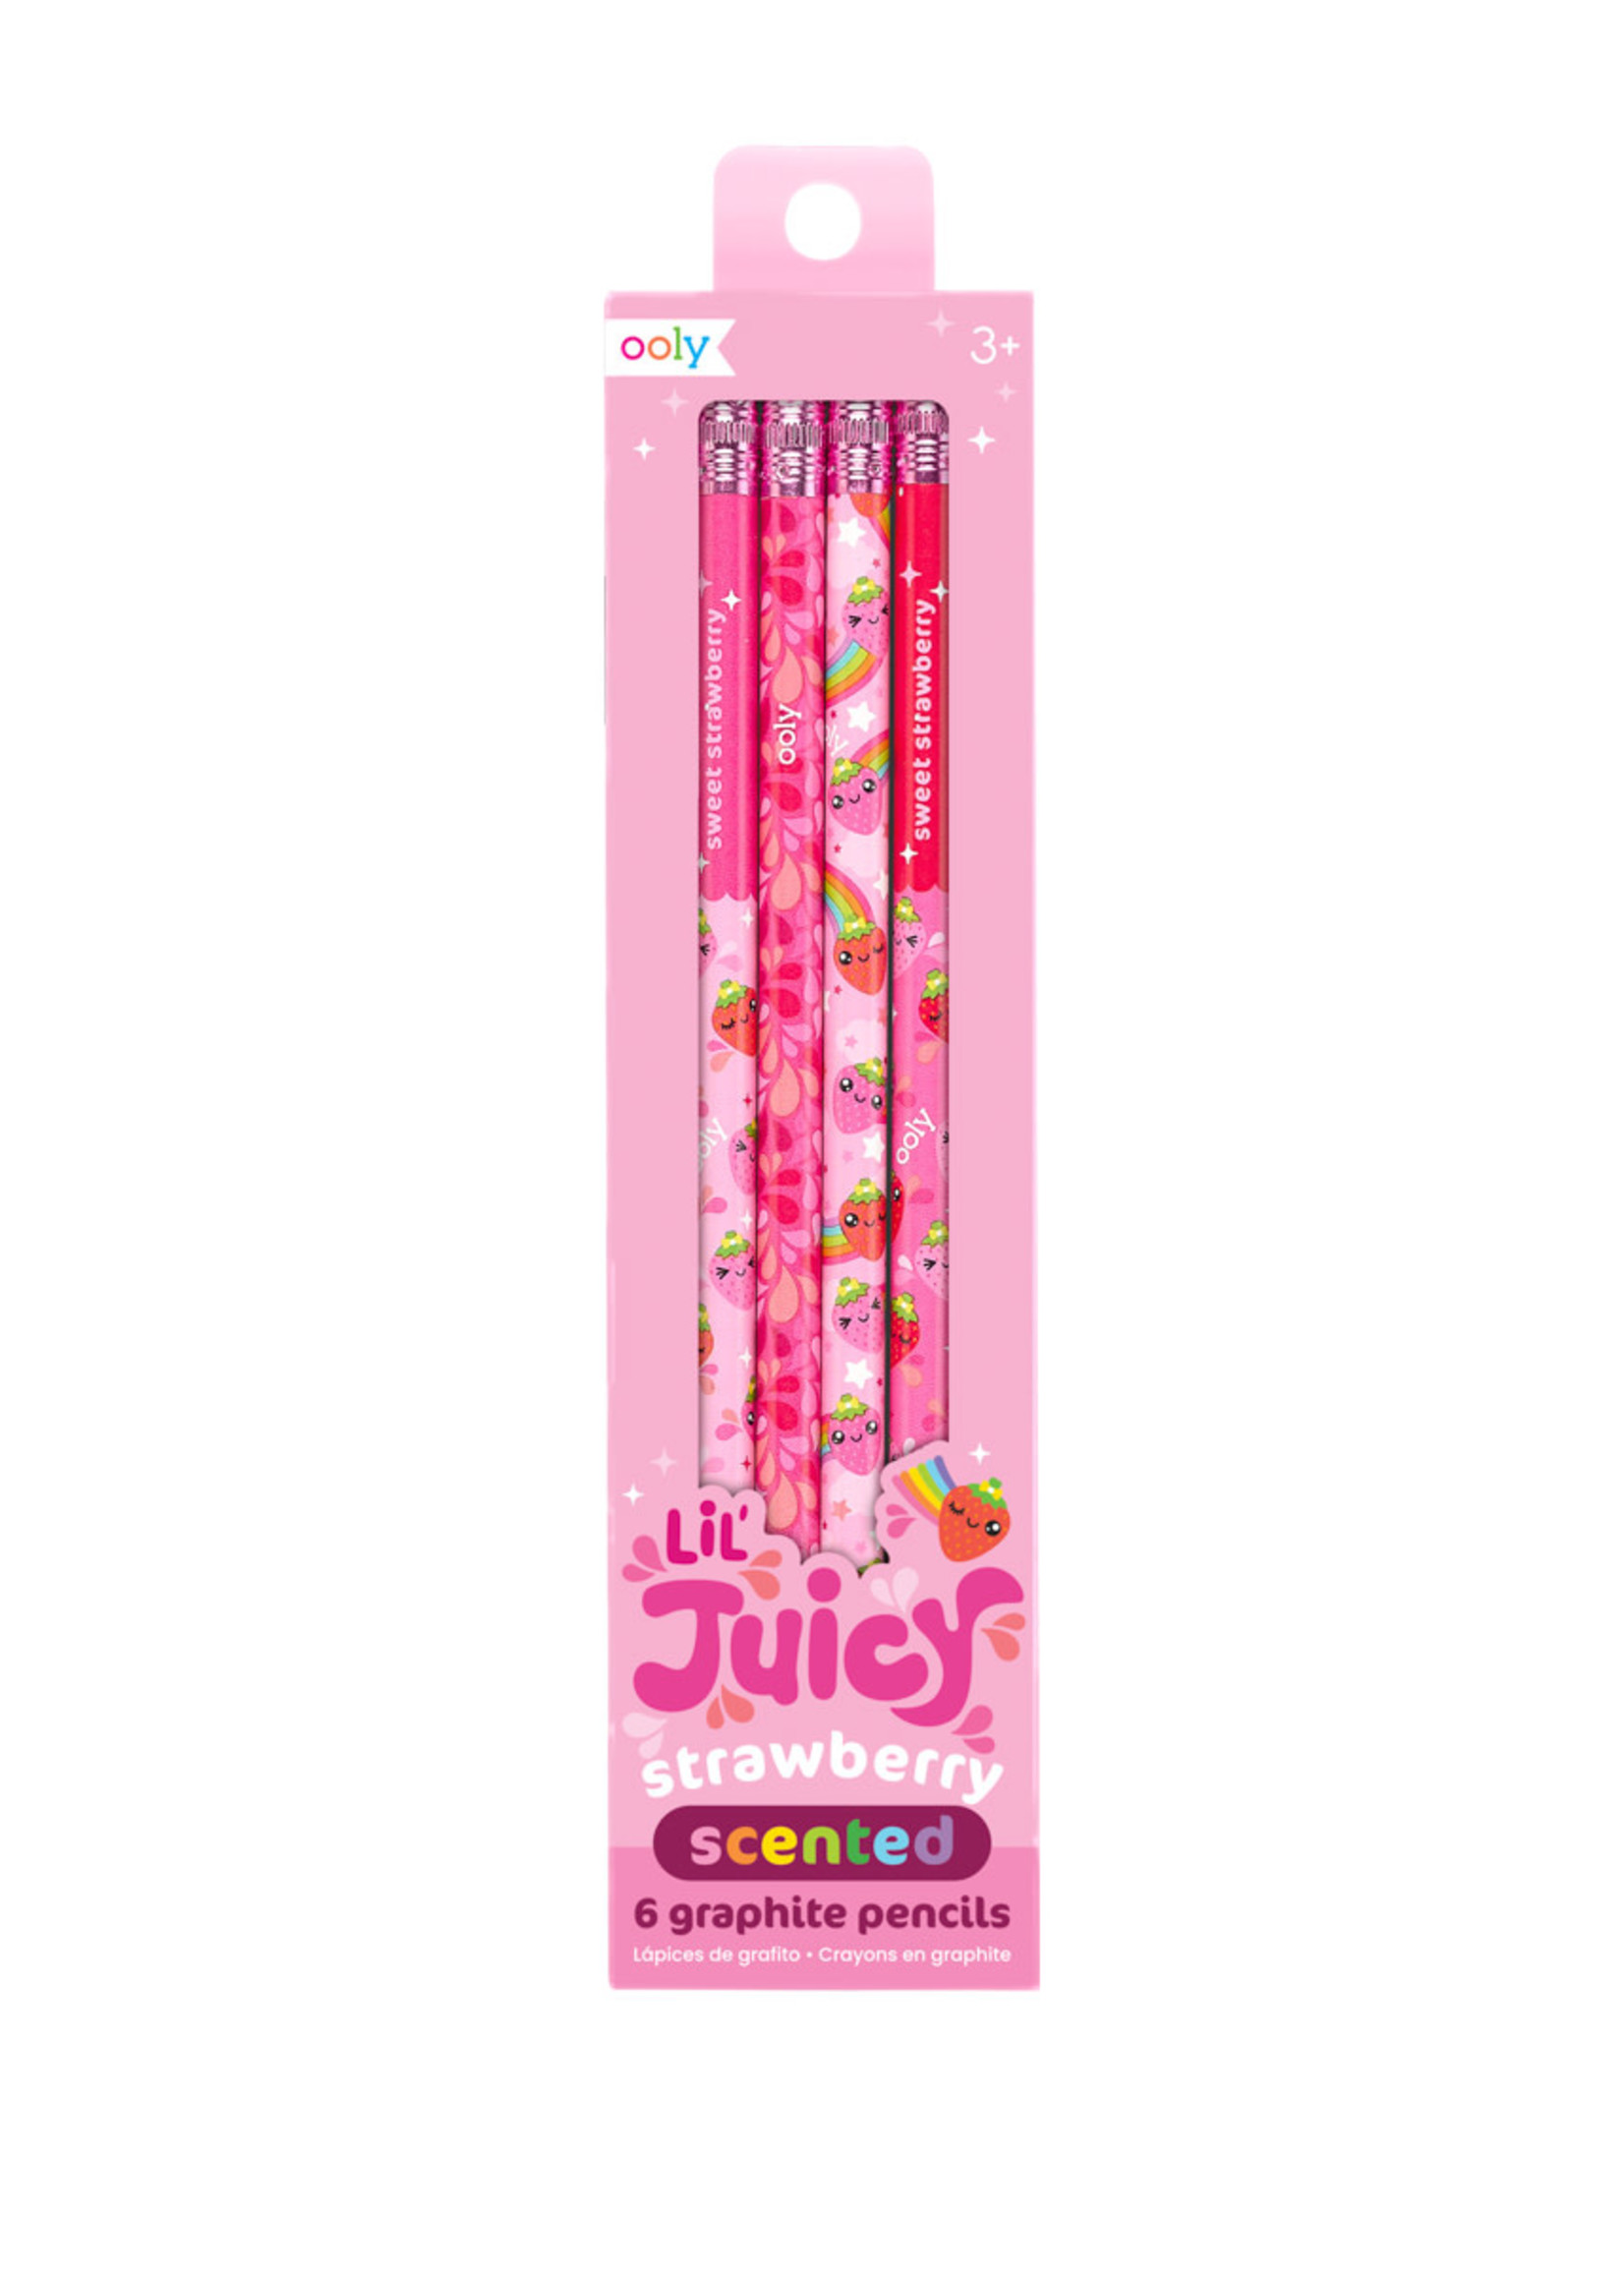 OOLY Lil Juicy Scented Graphite Pencils -Strawberry  - set of 6